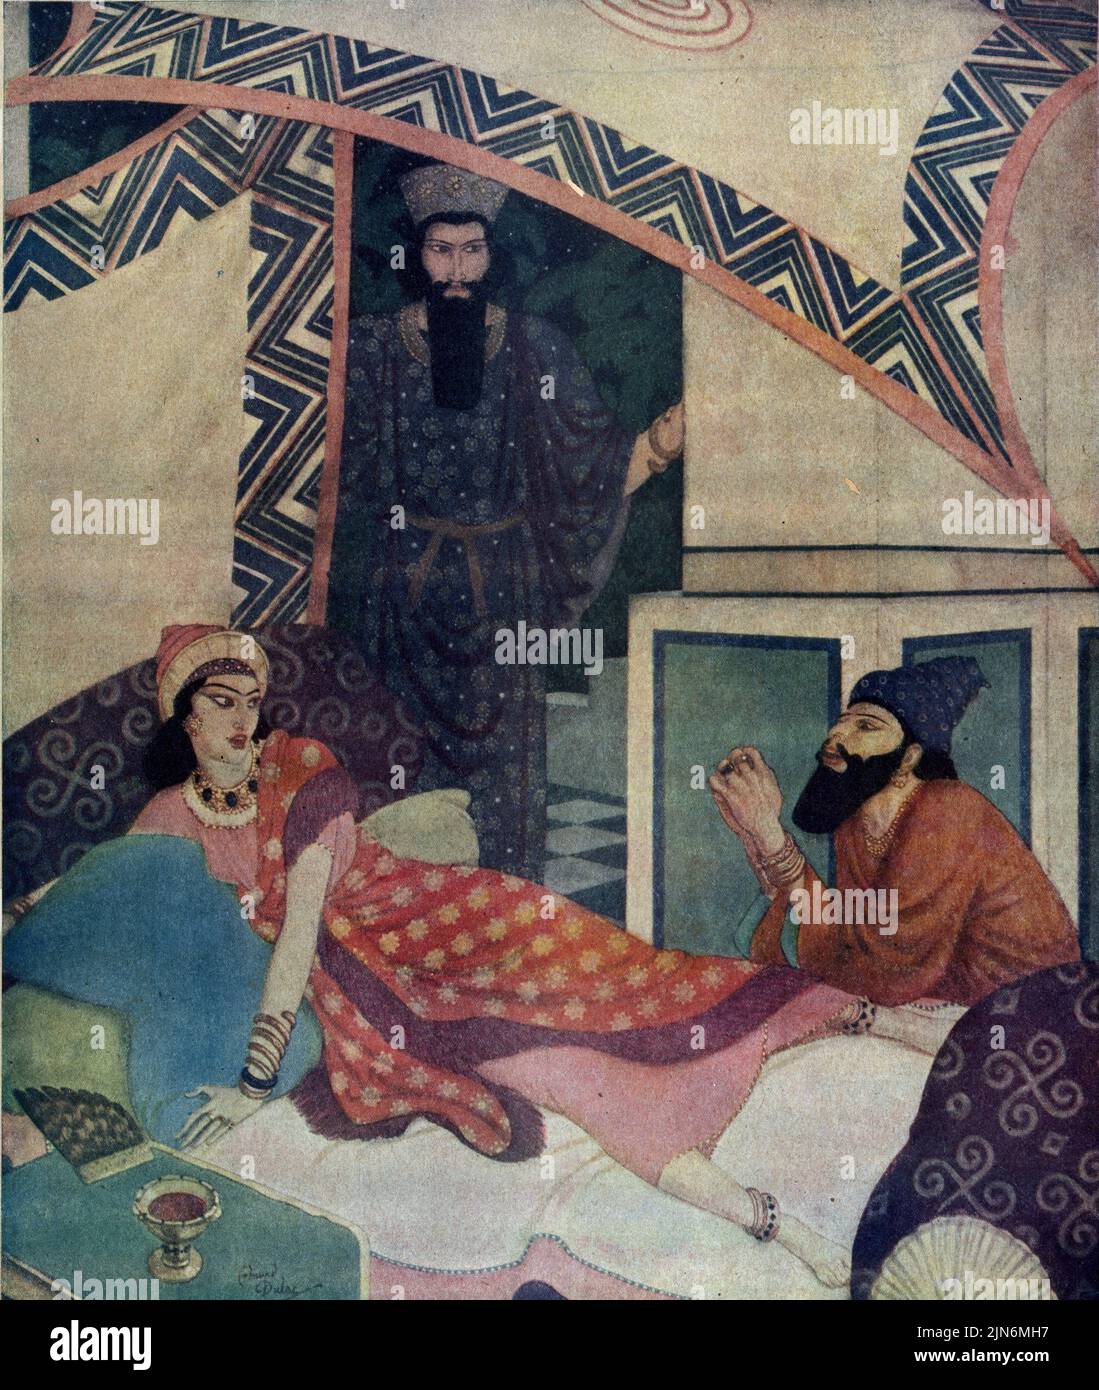 'Queen Ester and Haman' published December 21,1924 in the American Weekly Sunday magazine painted by Edmund Dulac from Bible Scenes and Heroes series. Stock Photo